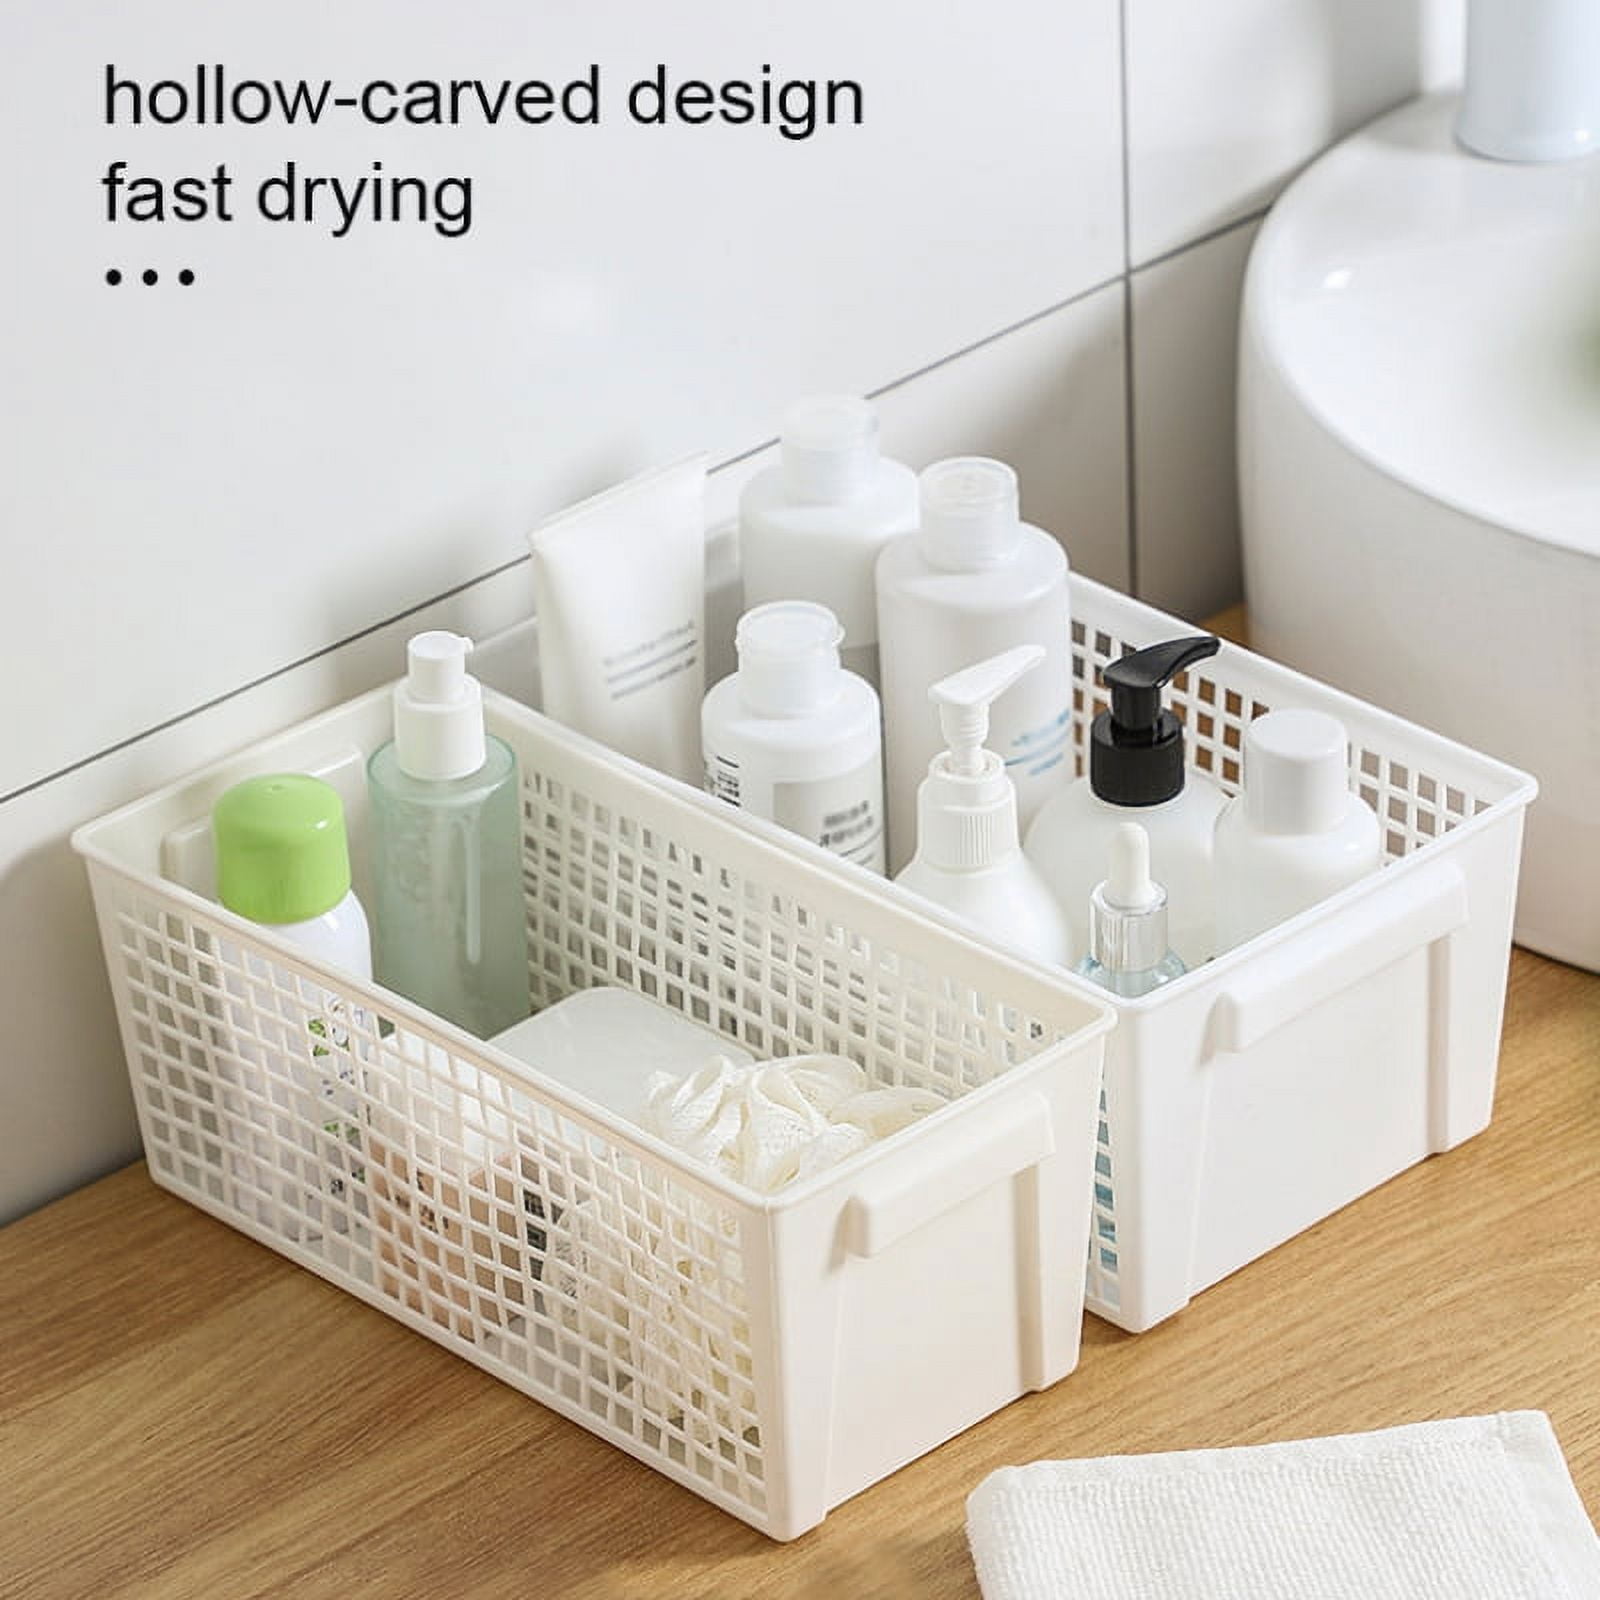 Homgreen [ 8 Pack ] Plastic Storage Baskets - Small Pantry Organization and  Storage Bins - Household Organizers for Laundry Room, Bathrooms, Bedrooms,  Kitchens, Cabinets, Countertop 